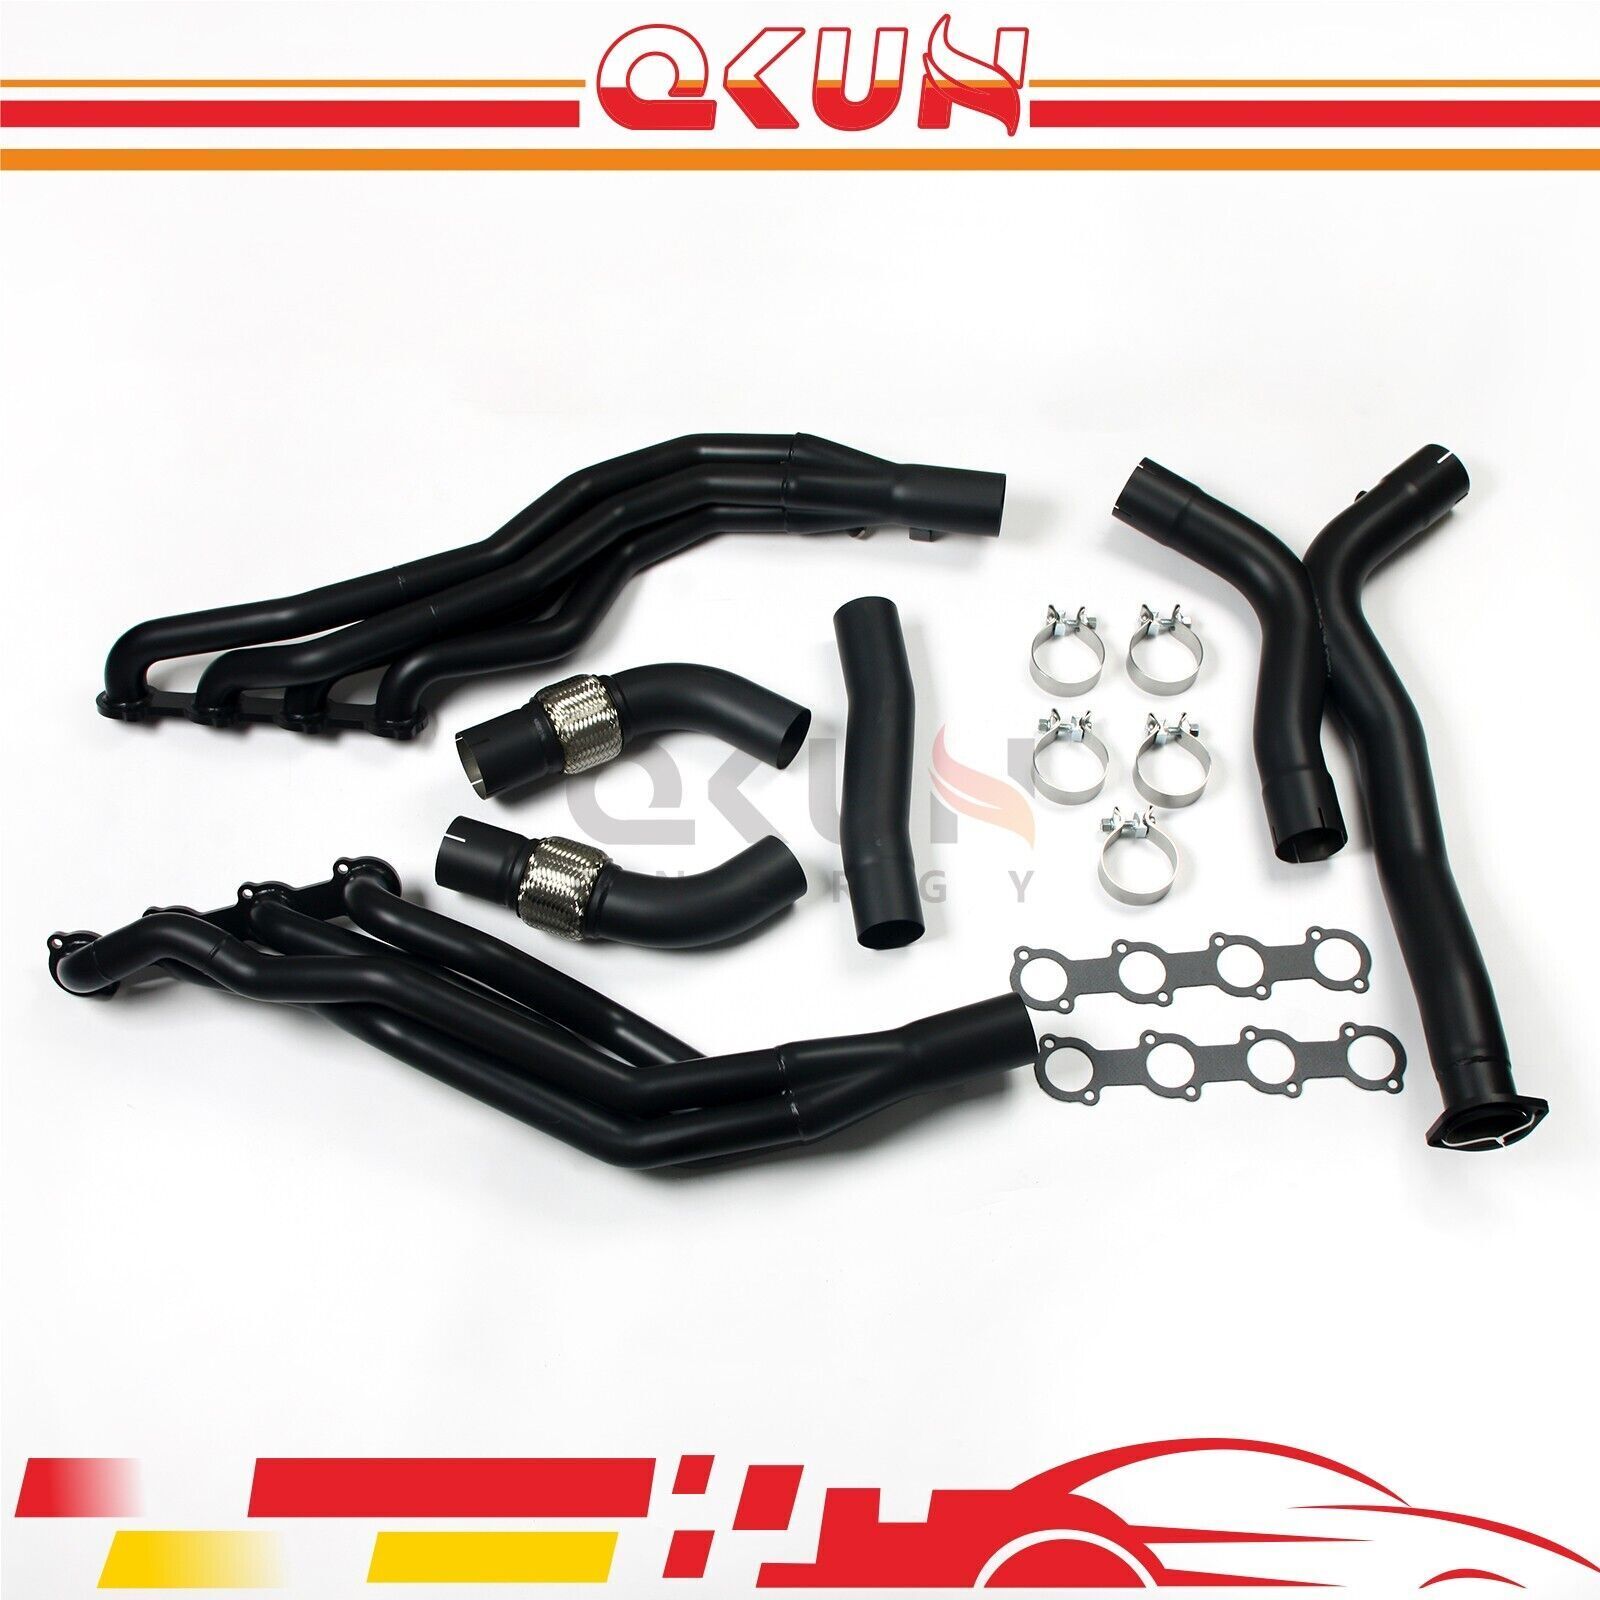 REPLACEMENT HEADER FOR MERCEDES AMG CLS55 CLS500 E55 E500 M113K W211 CERAMIC